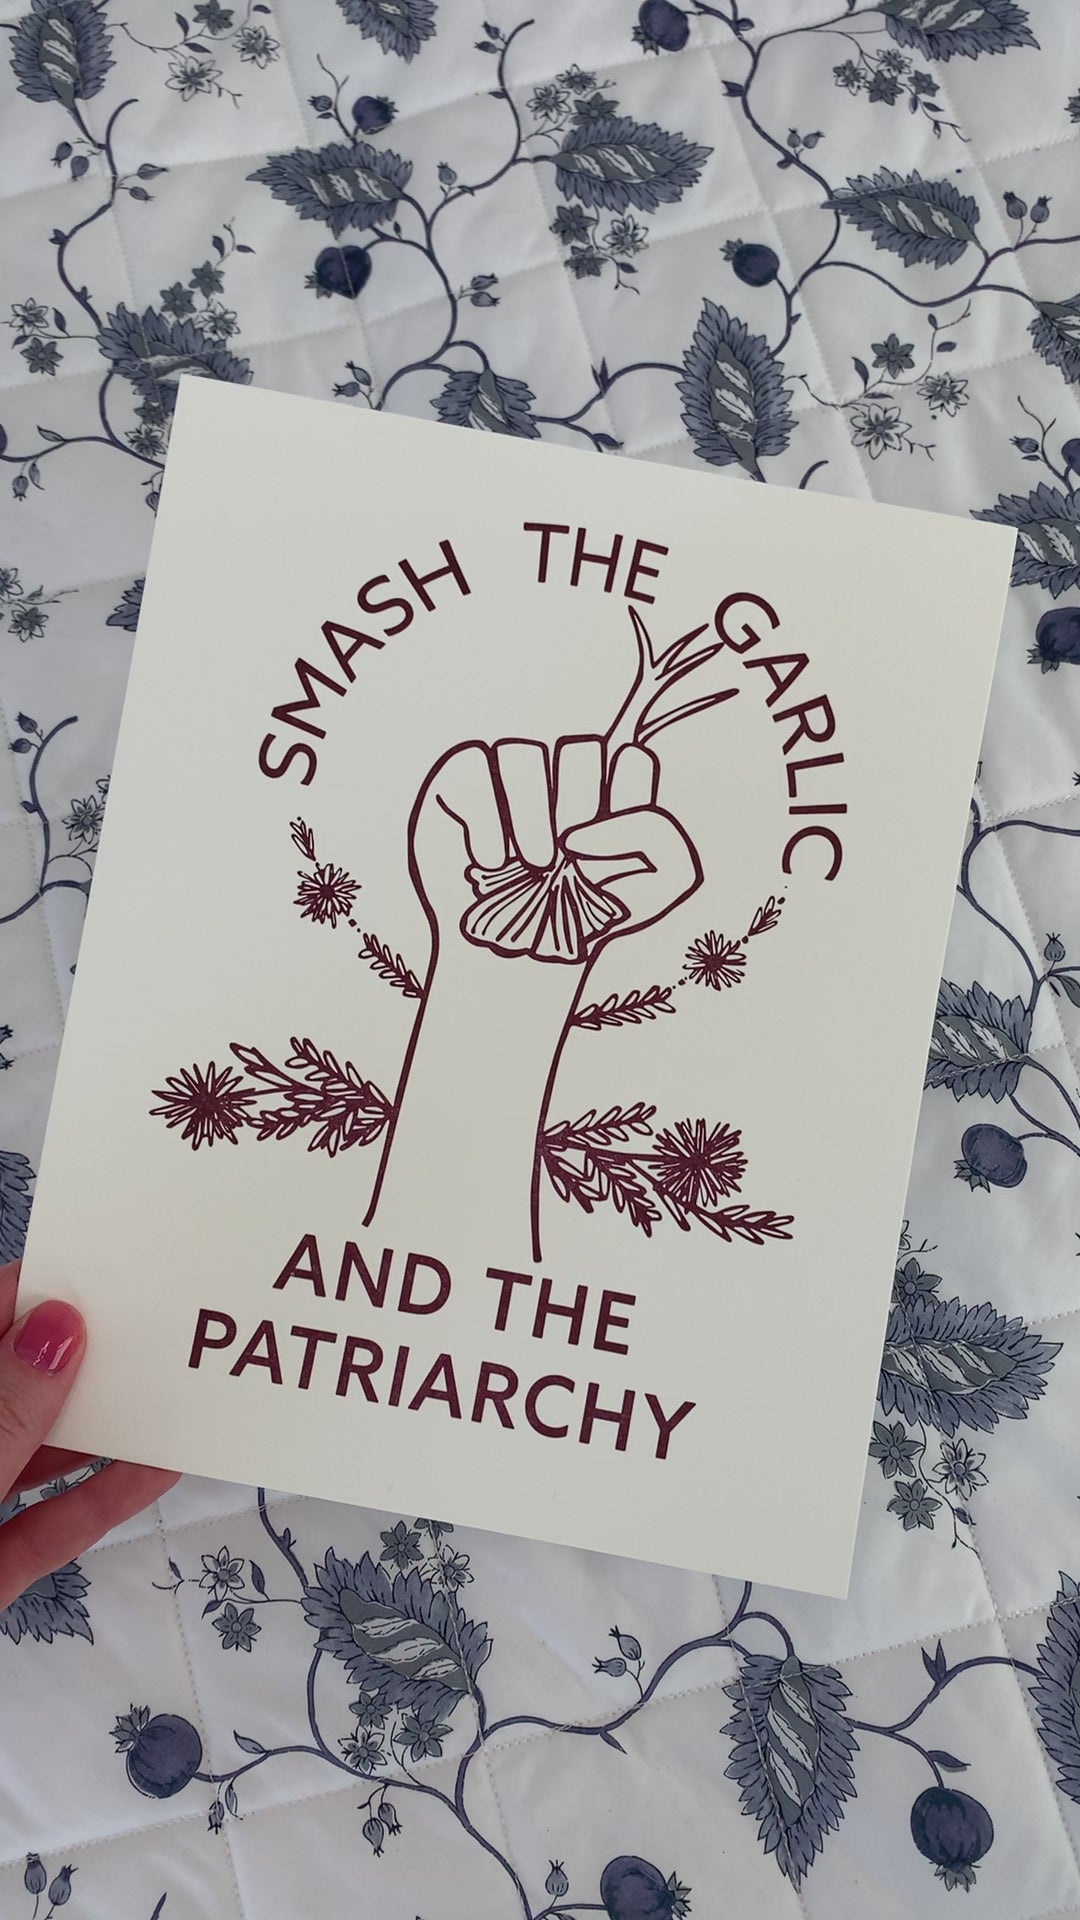 An art print that reads "Smash the Garlic and the Patriarchy" in a dark red color with an illustration of a hand holding garlic